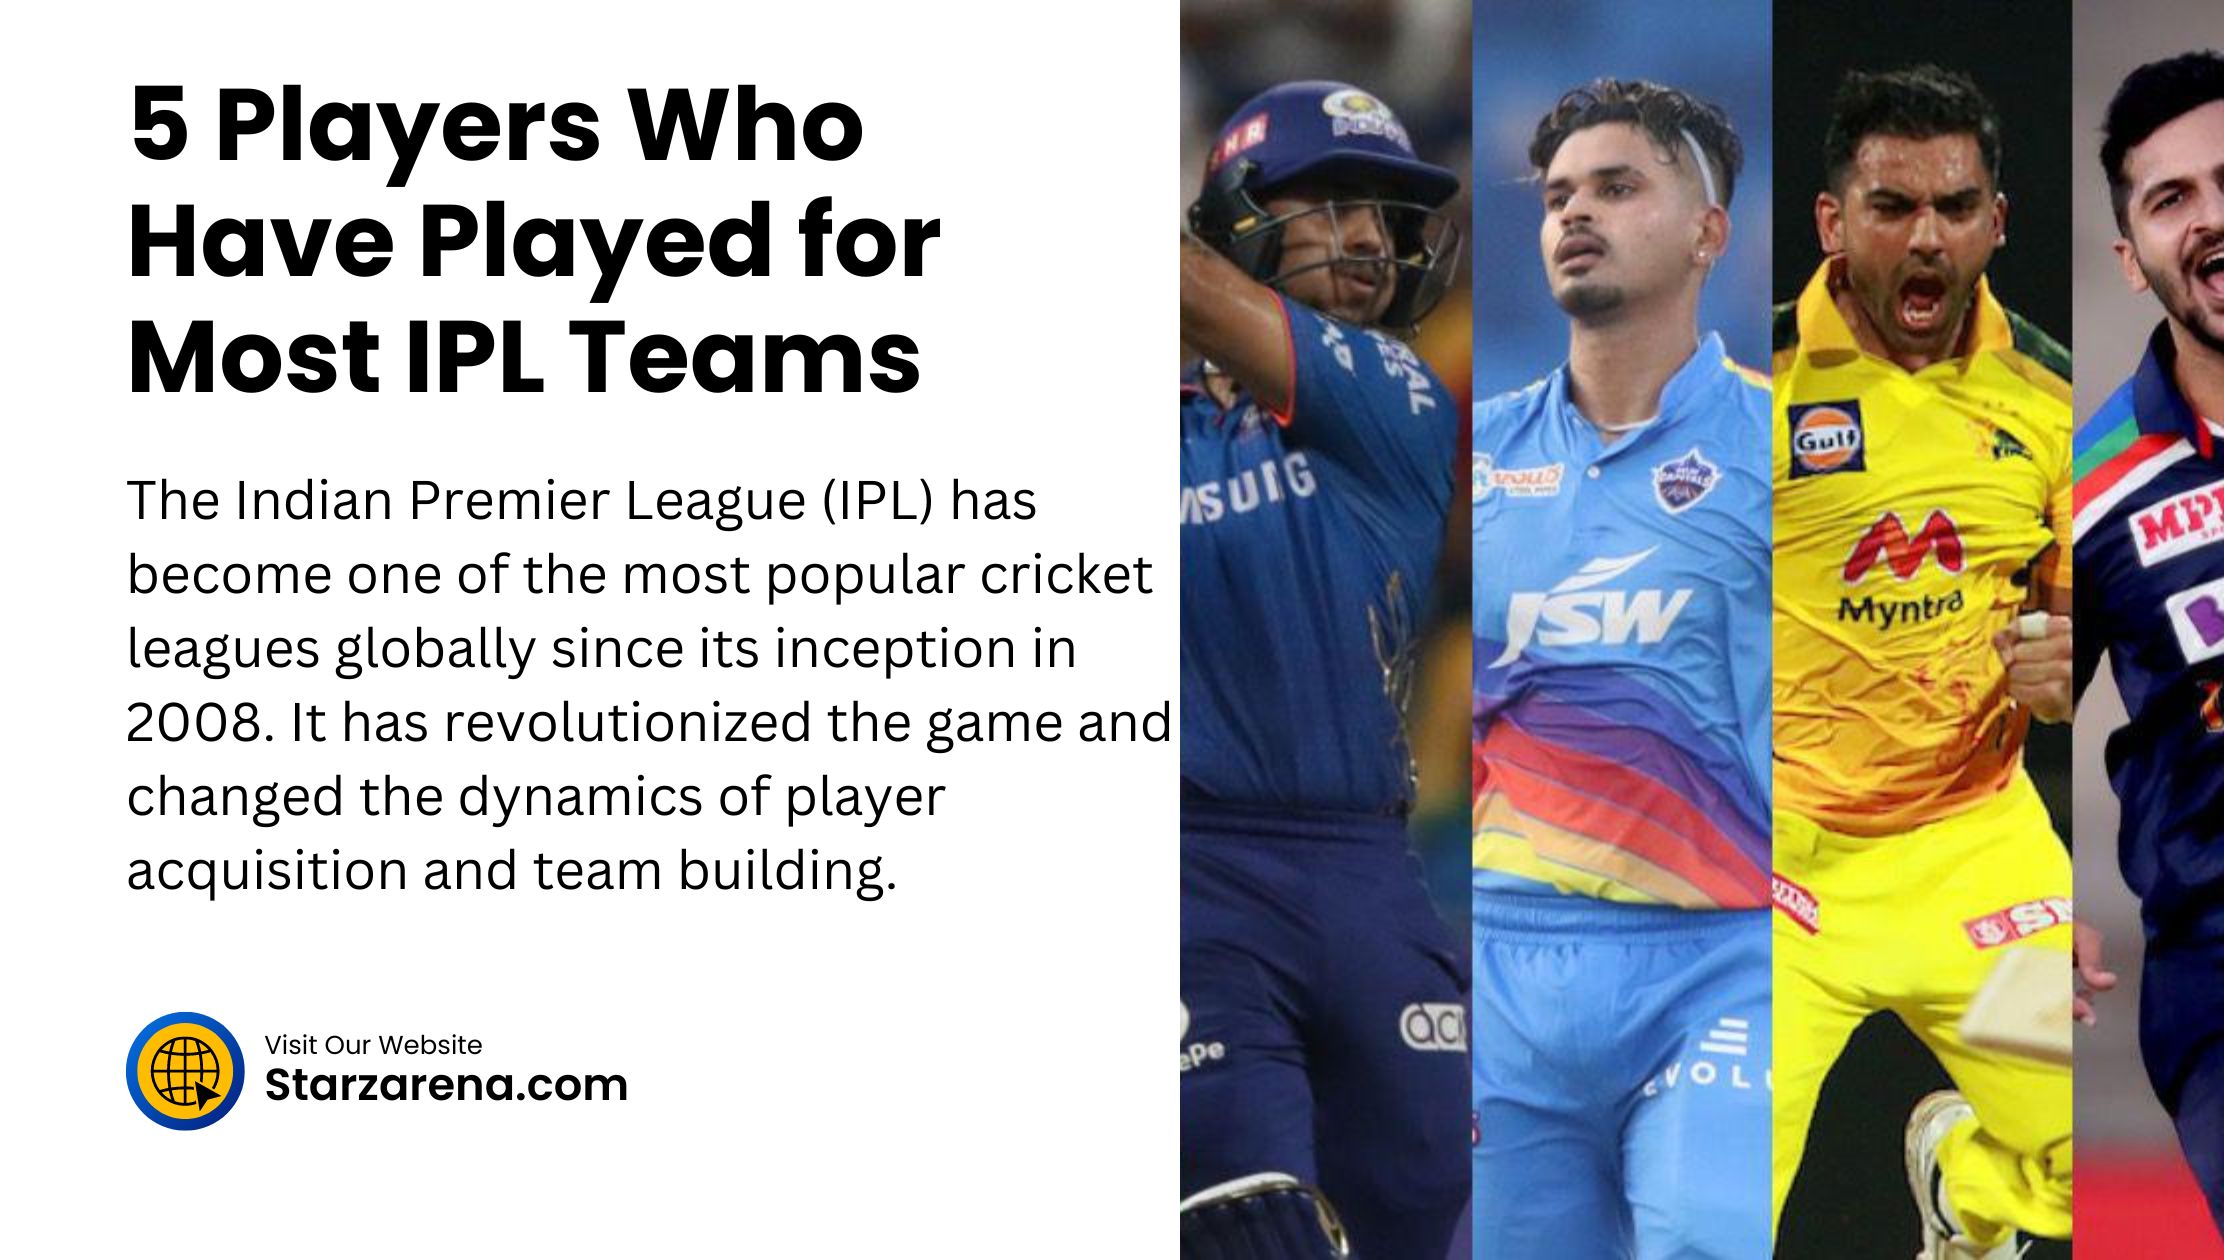 5 Players Who Have Played for Most IPL Teams